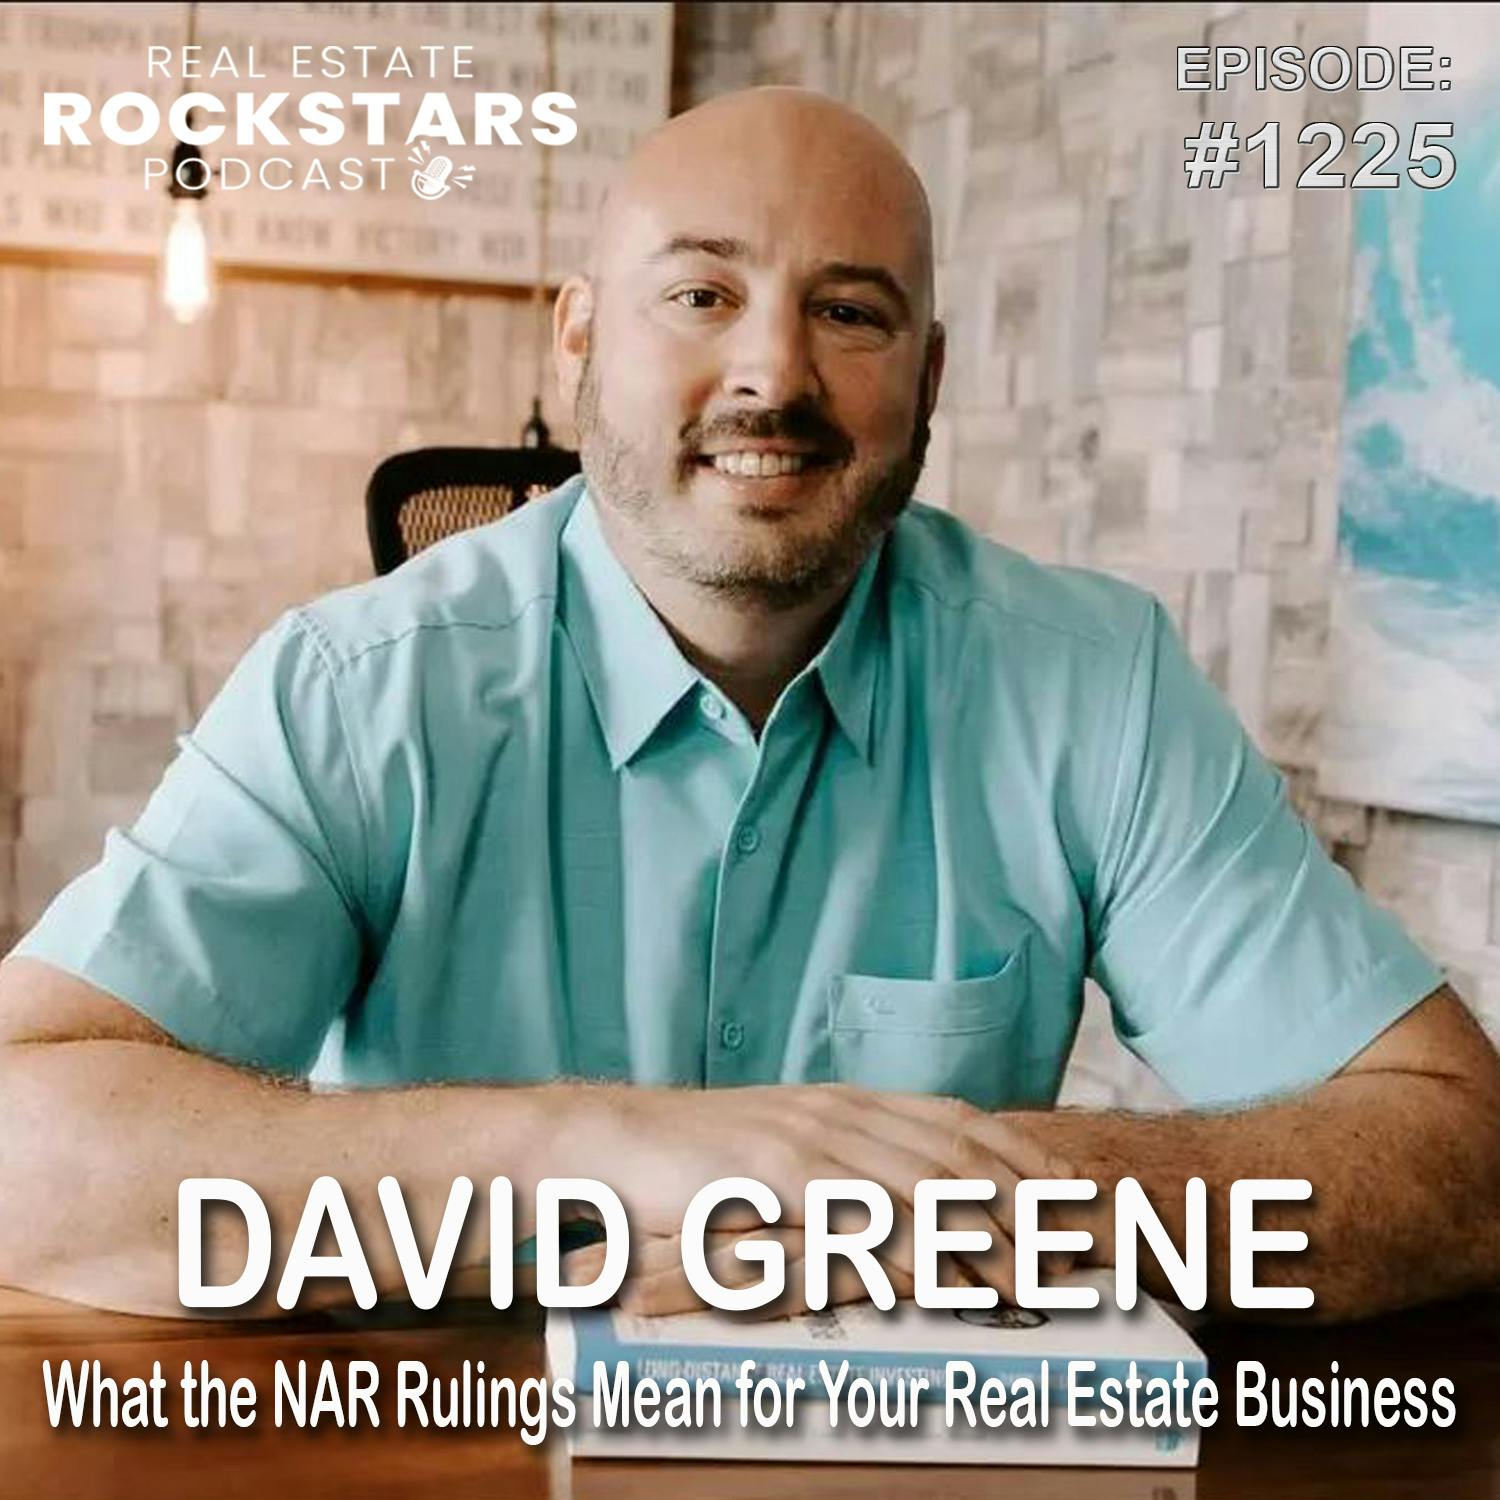 1225: David Greene: What the NAR Rulings Mean for Your Real Estate Business